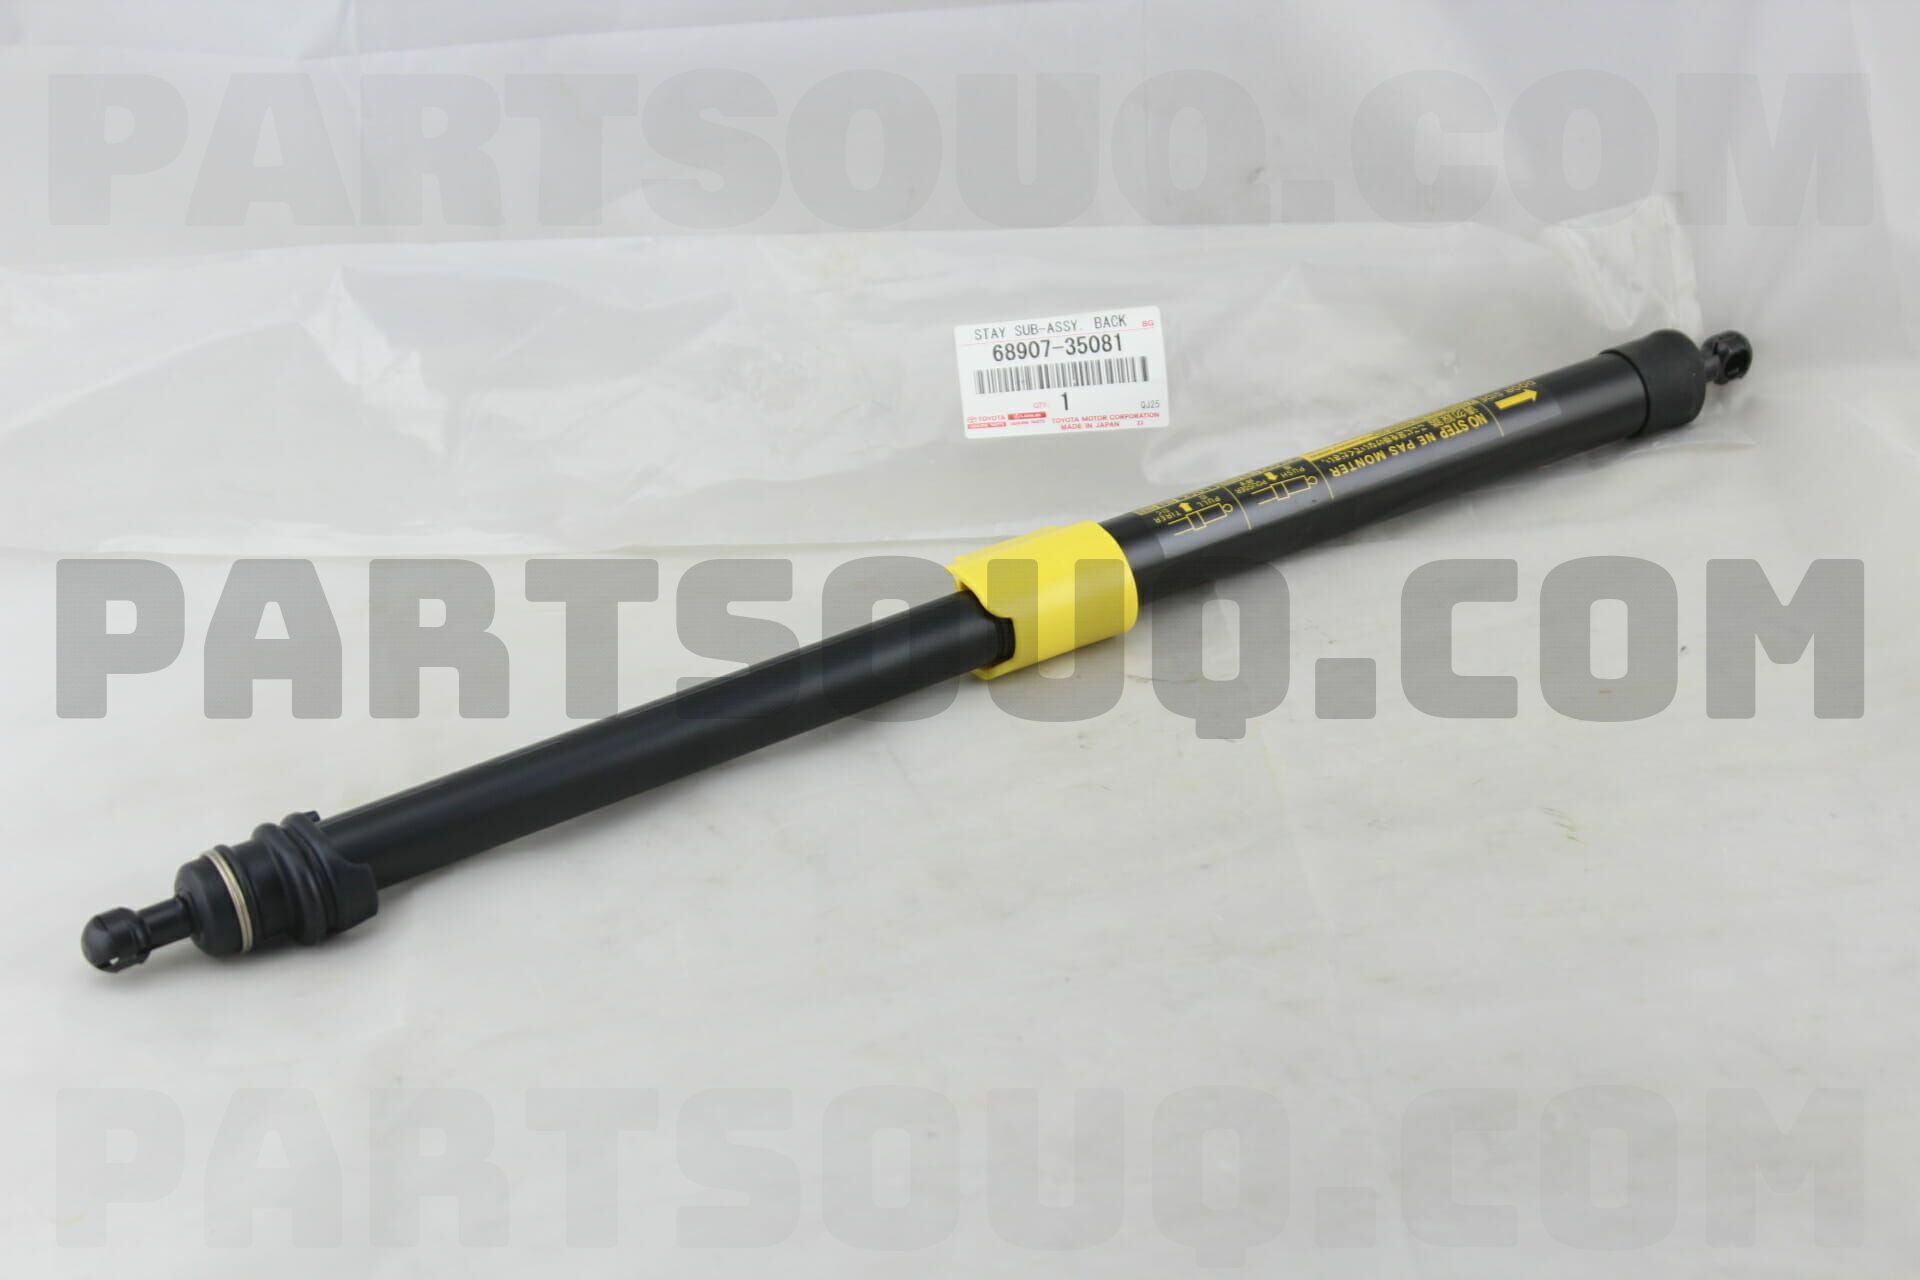 STAY SUB-ASSY, BACK DOOR DAMPER, LH 6890735081, Toyota Parts